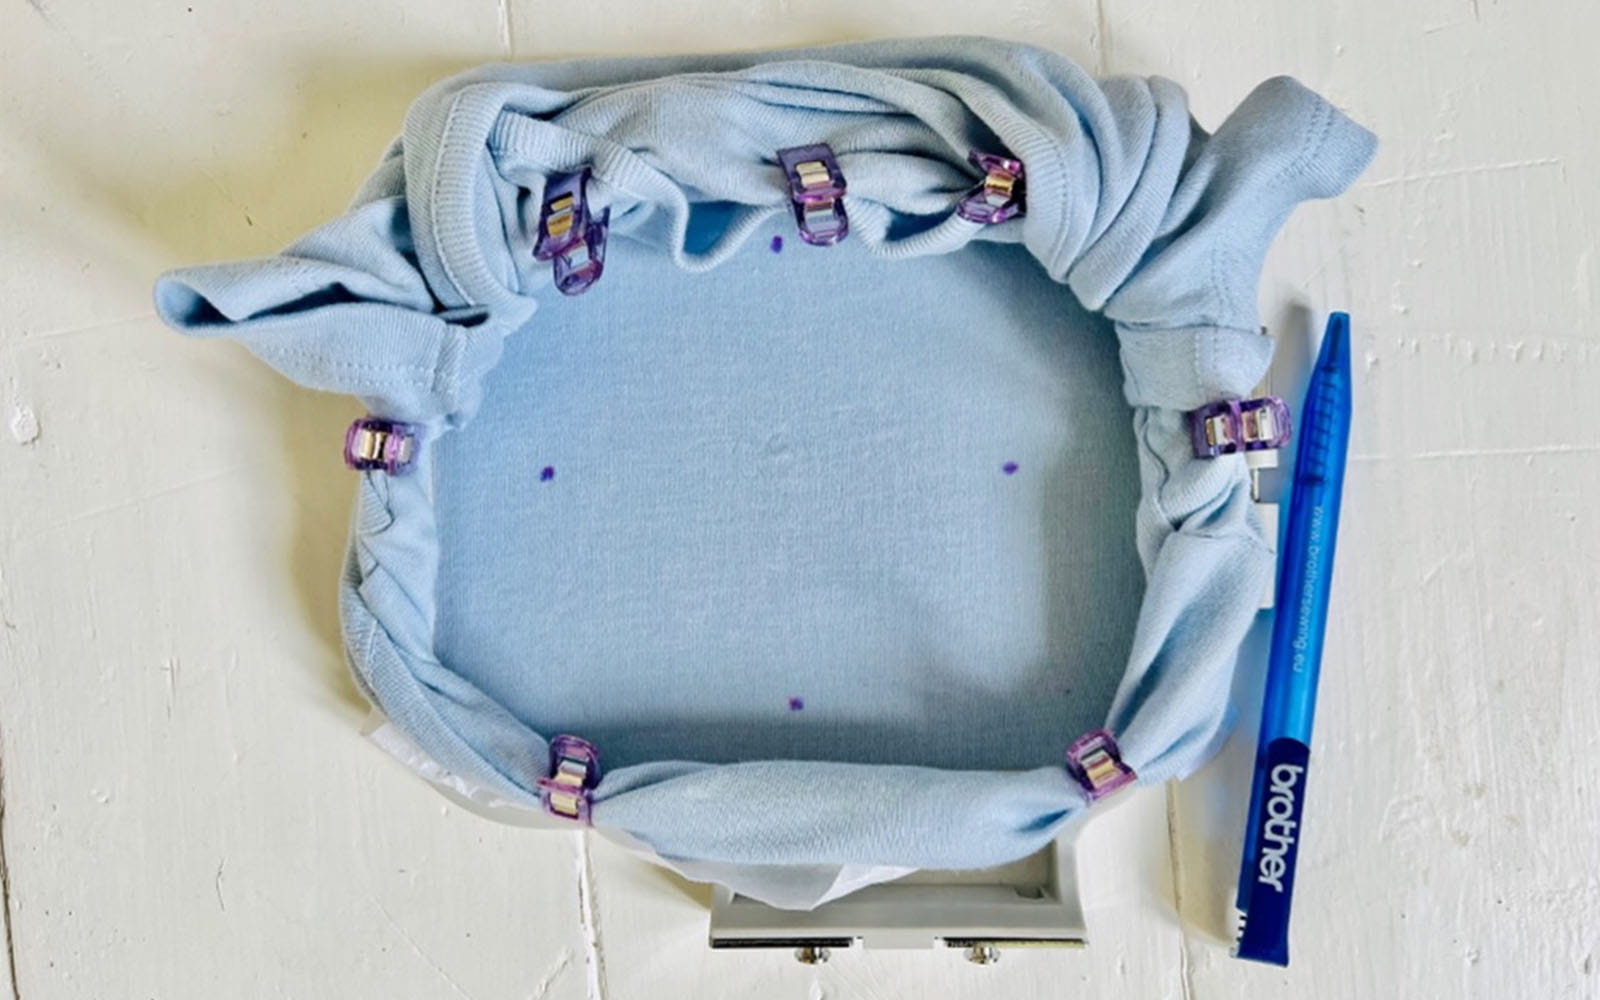 Blue babygrow rolled and clipped around a Brother embroidery hoop